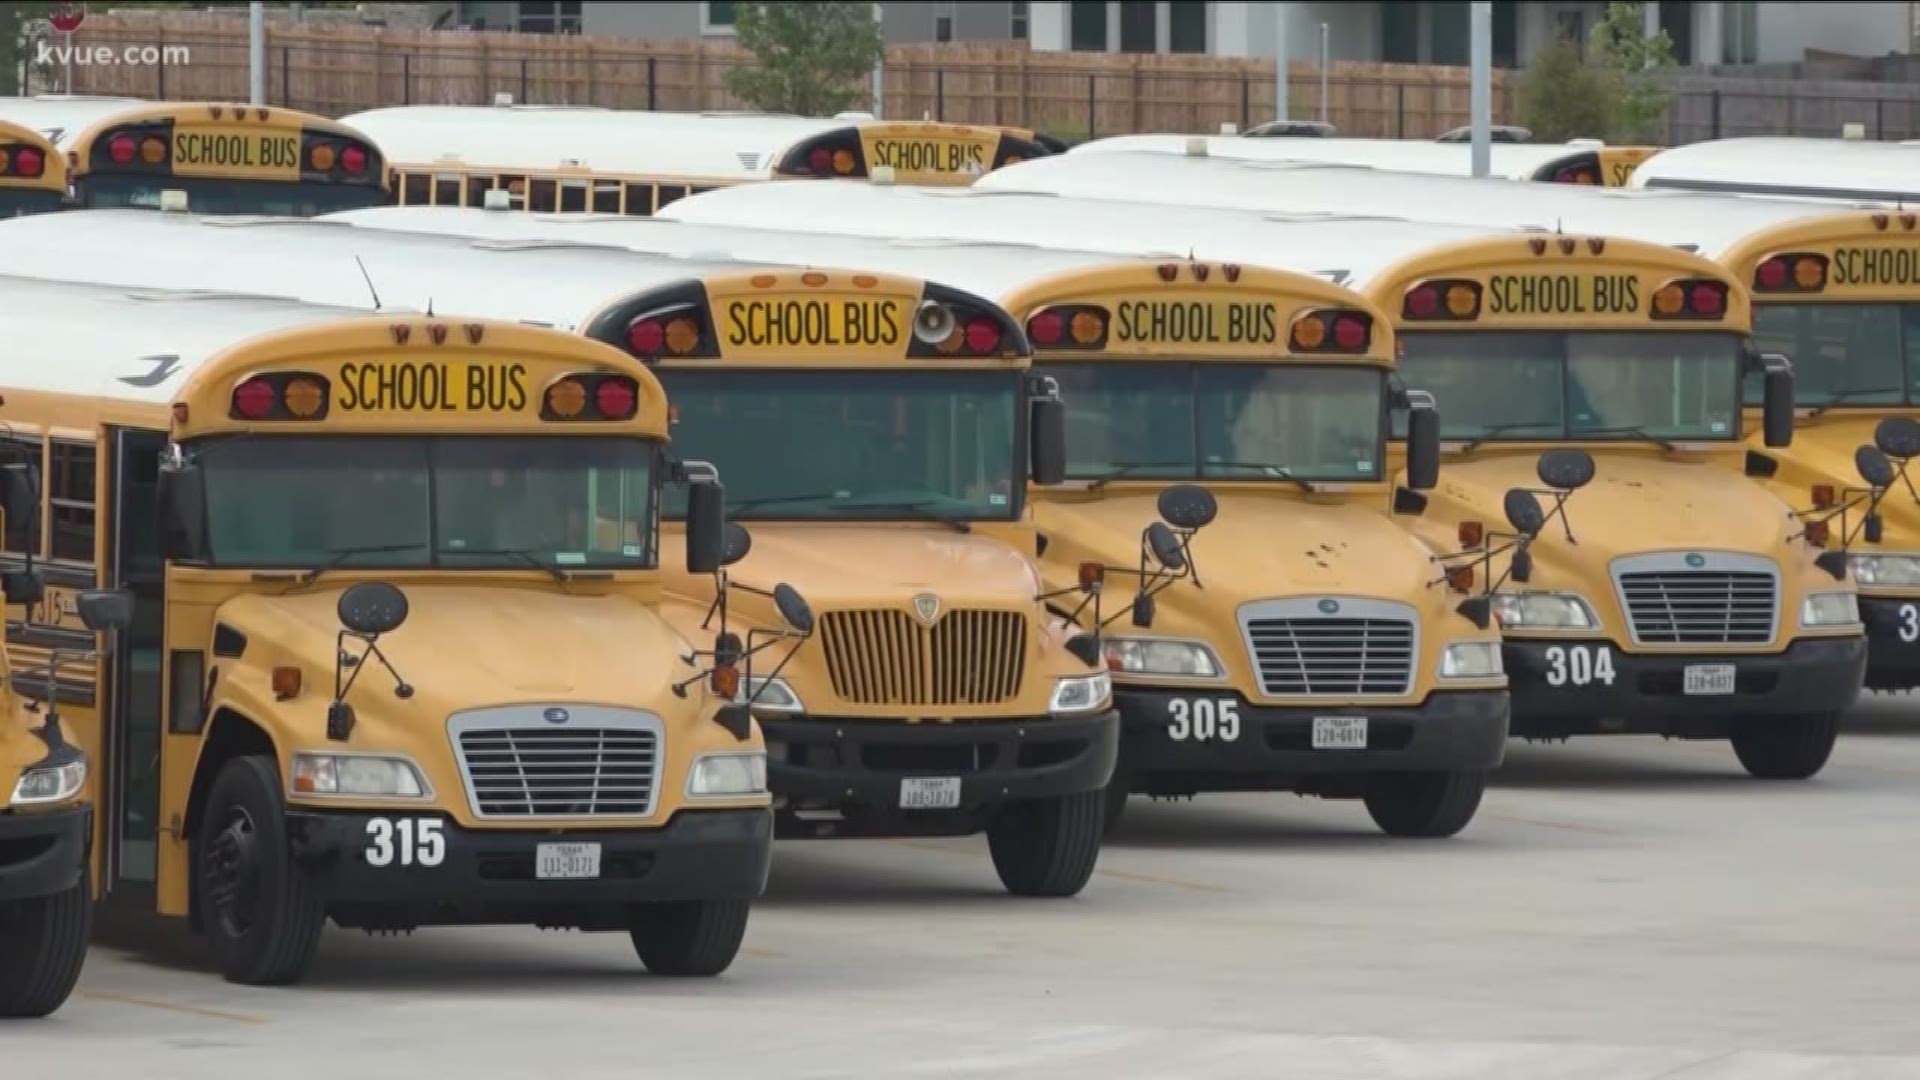 Leander ISD parents are fed up with the bus problems they've been having since the school year started almost two weeks ago, including late pick-ups and drop-offs.